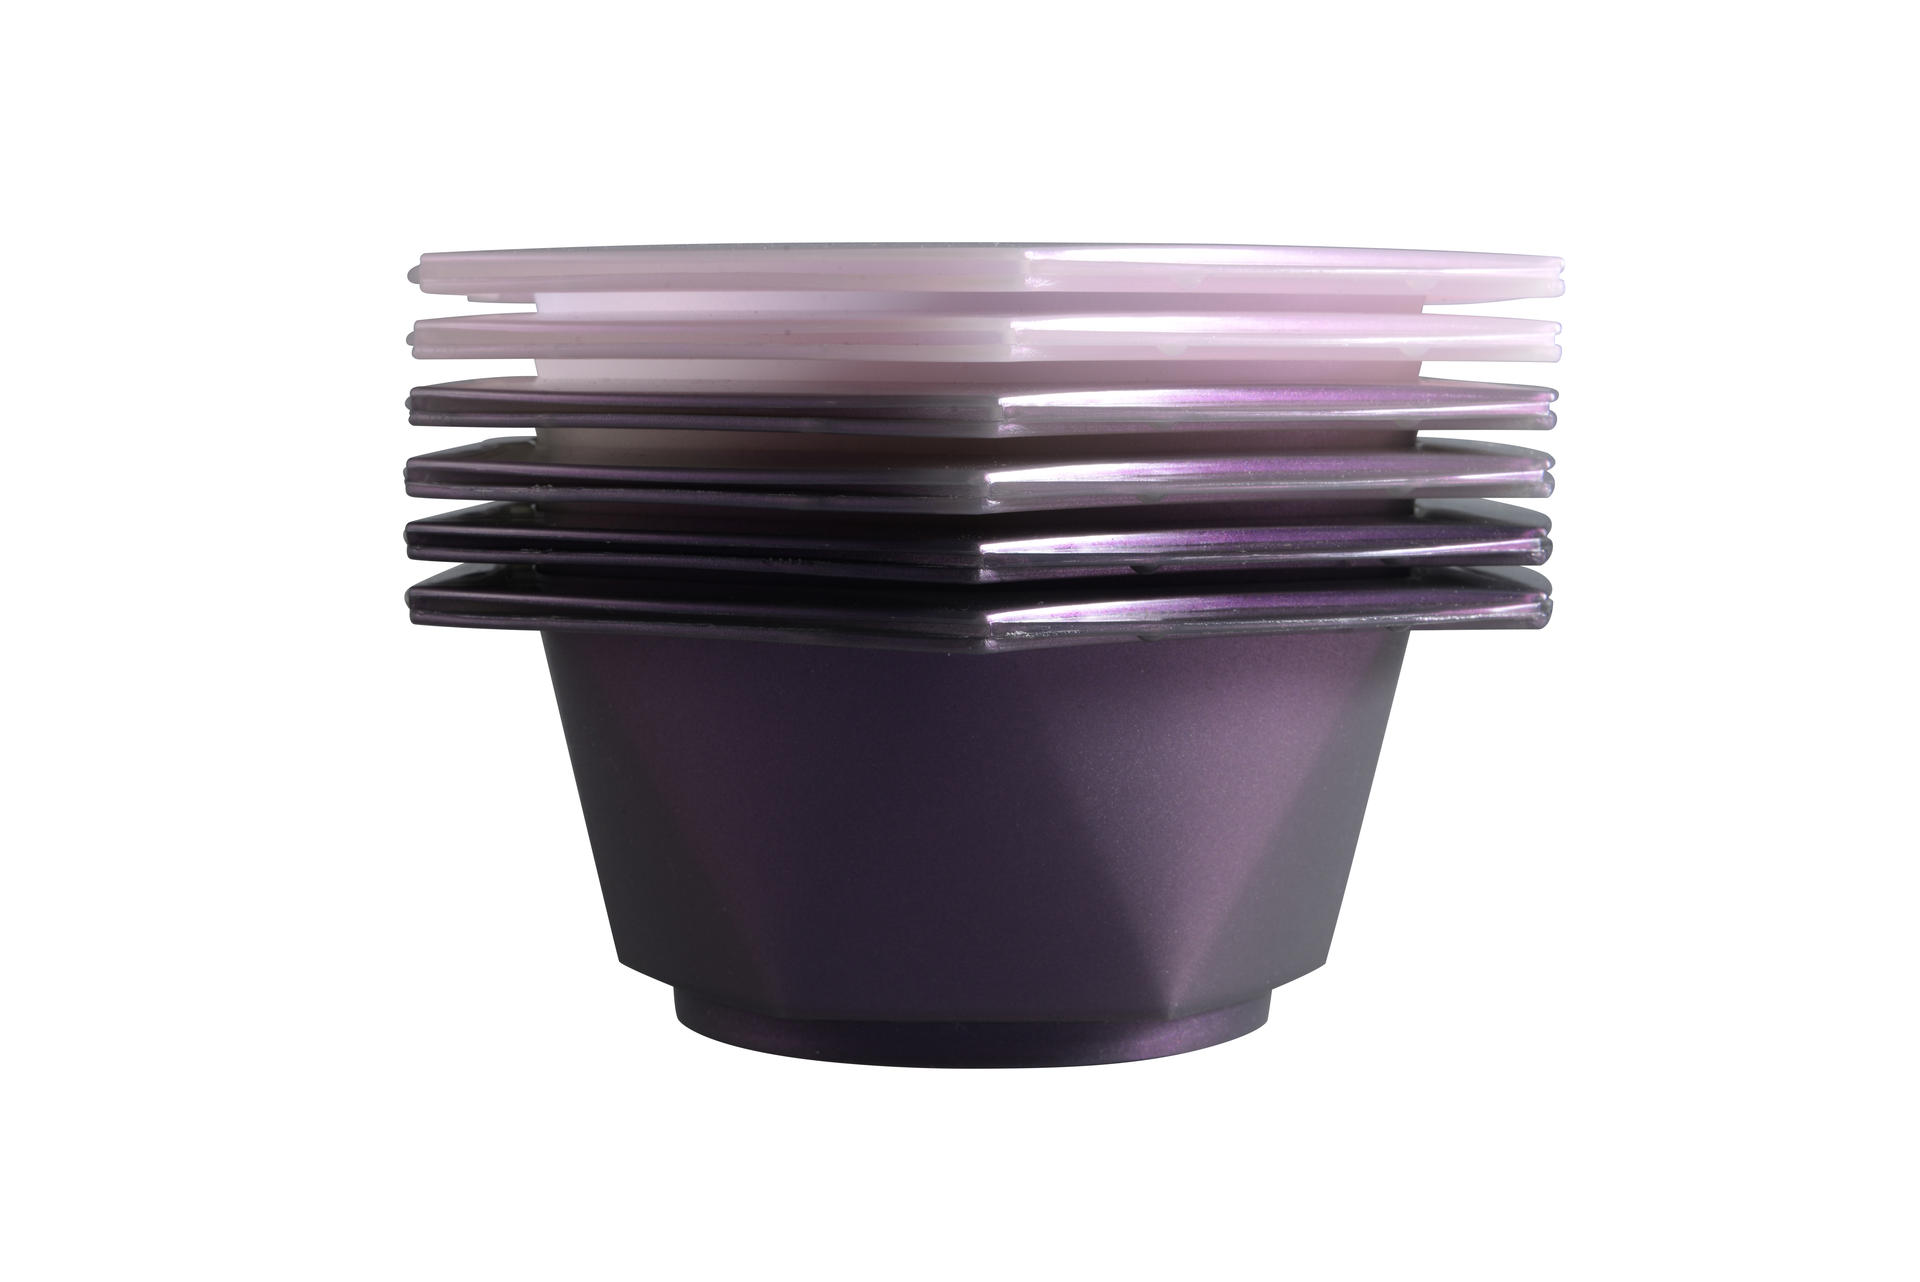 Barber Hair Color Dyeing Mixing Tint Bowls For Beauty Salon